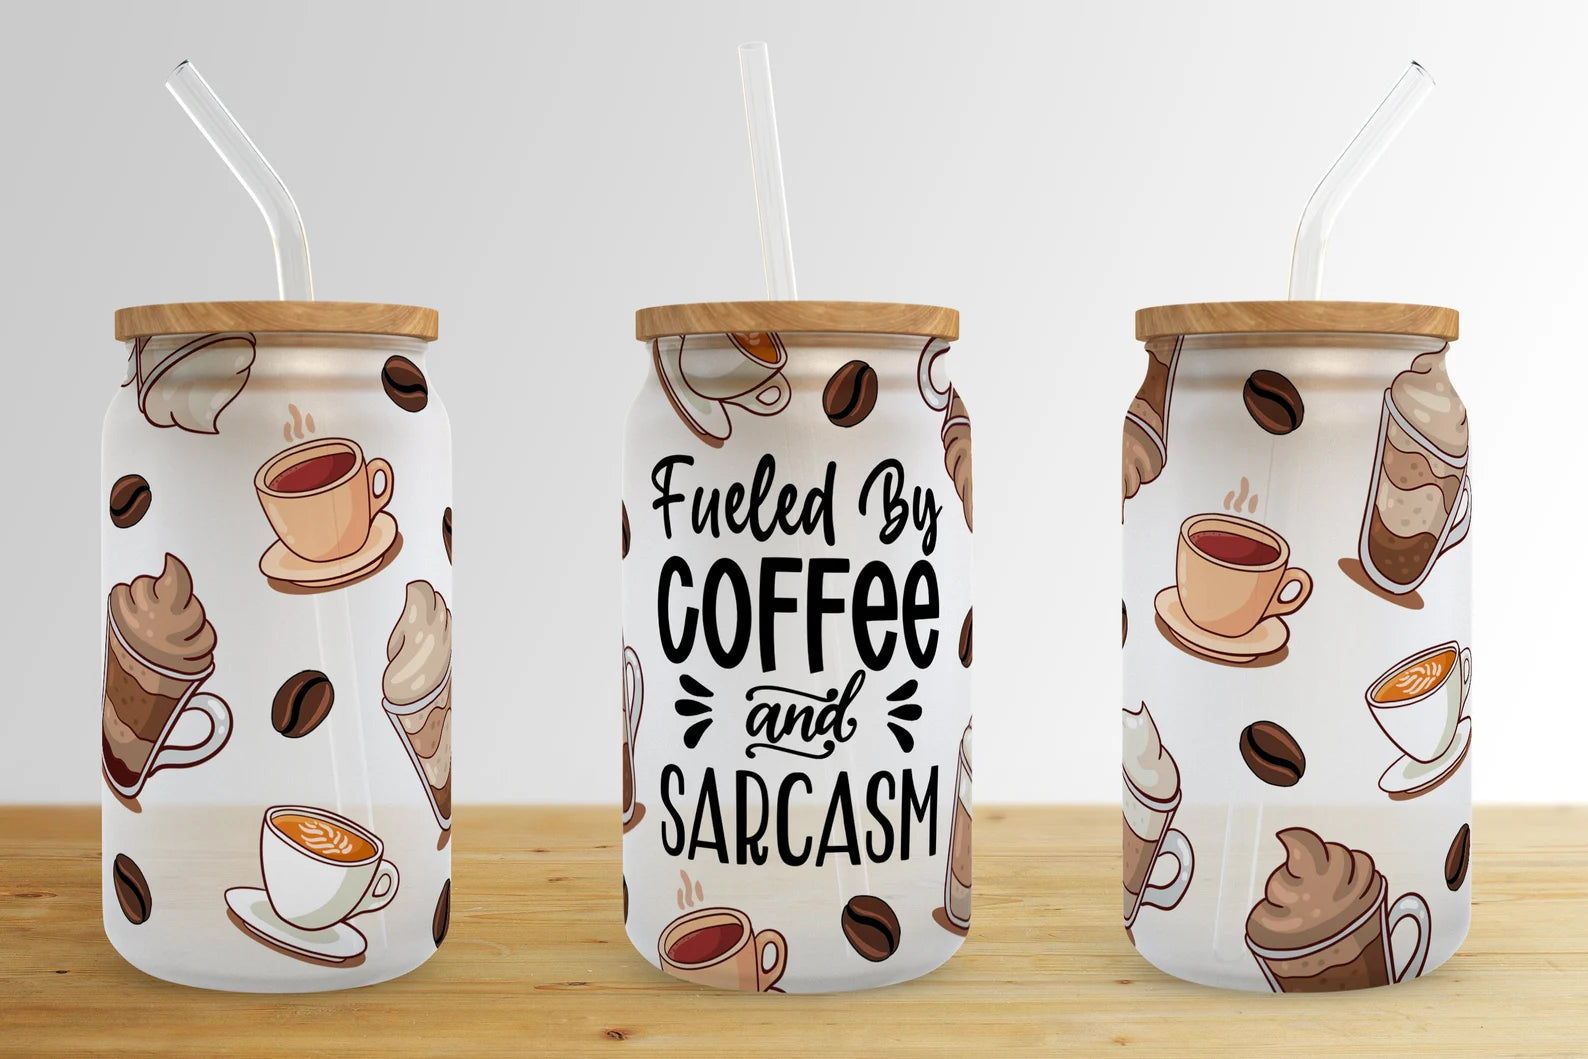 Coffee and sarcasm